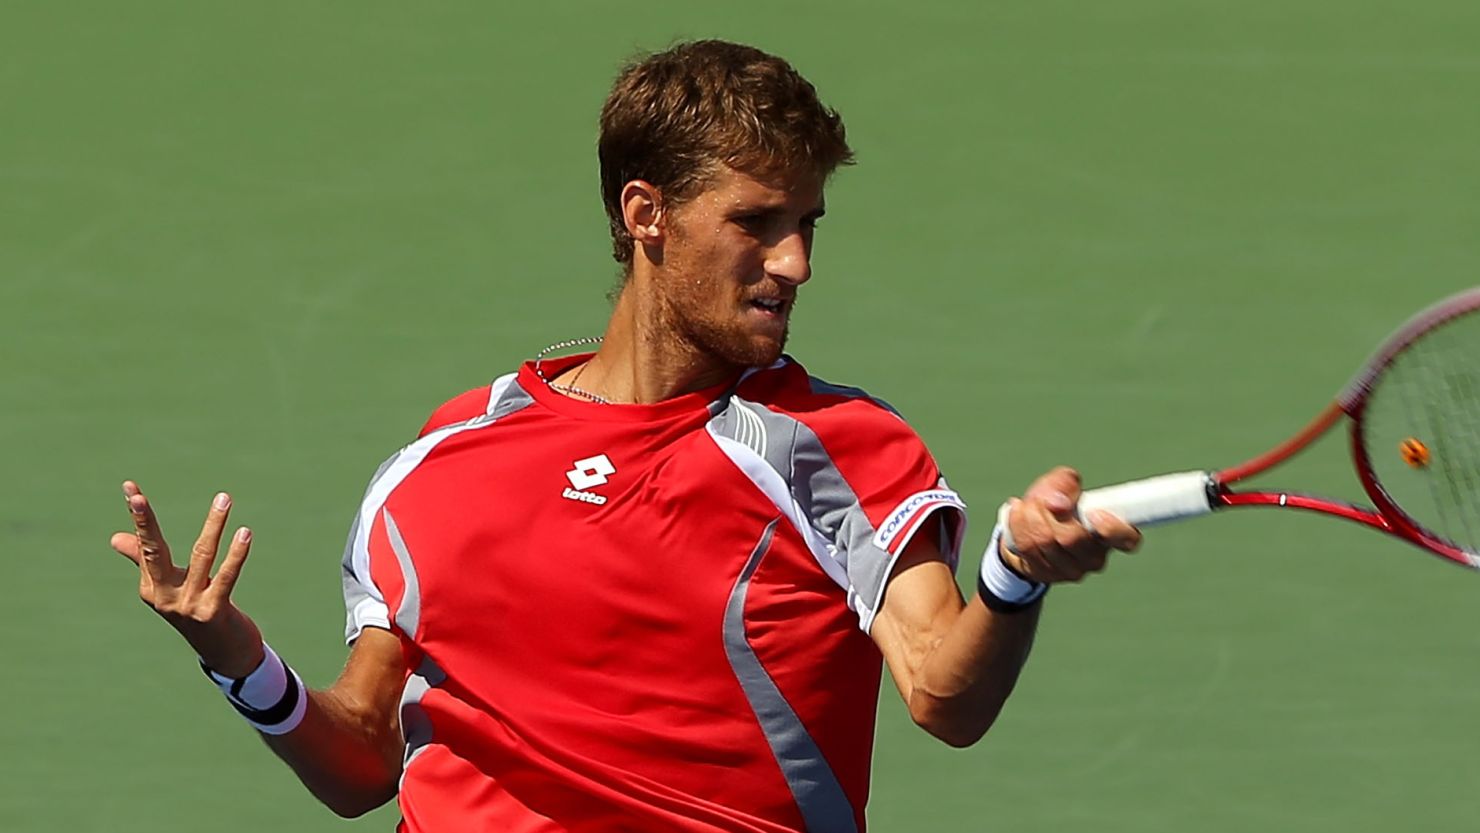 Martin Klizan of Slovakia powers a return during his four-set win over Jo-Wilfried Tsonga at the U.S. Open.